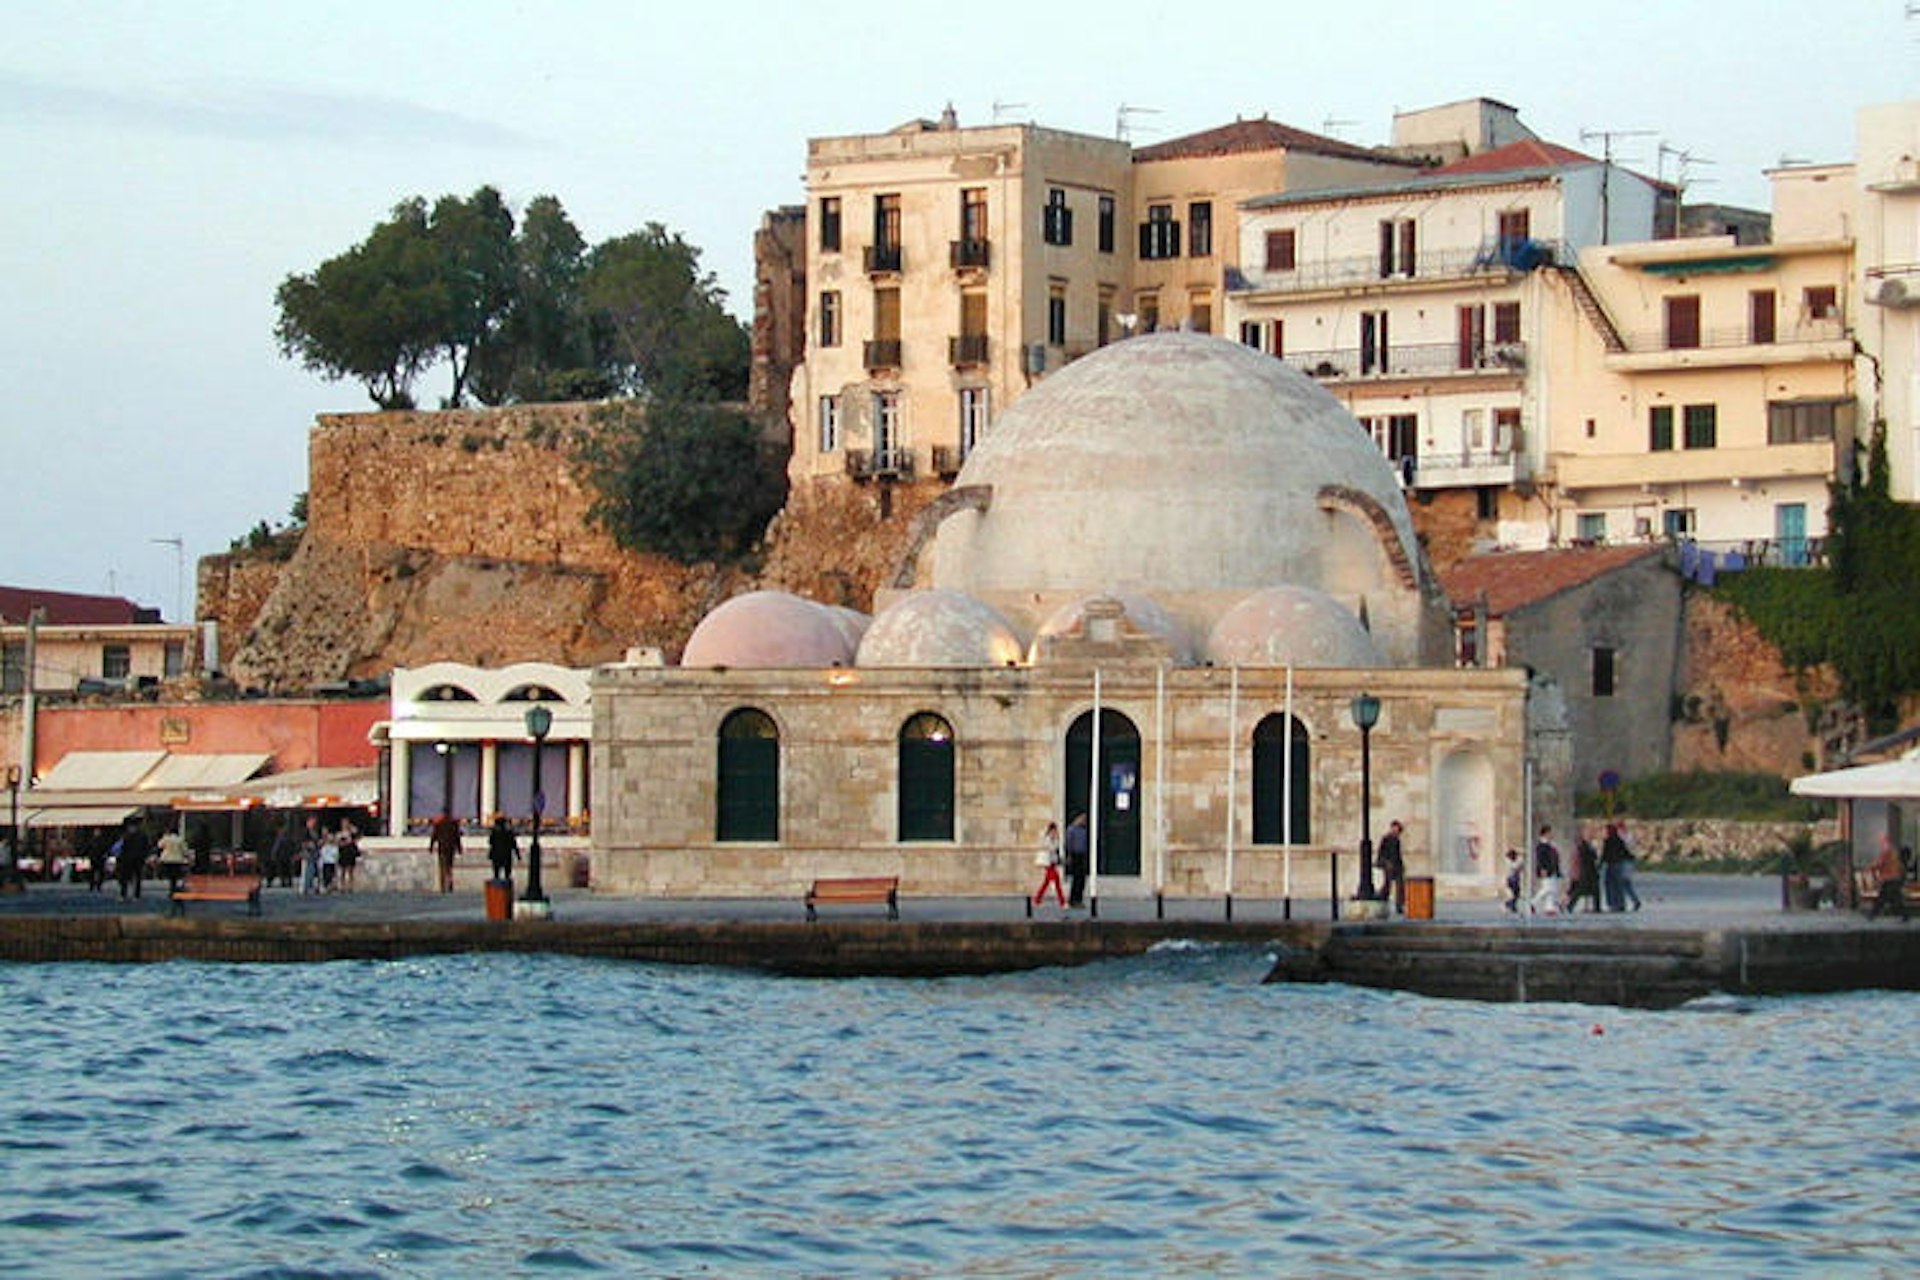 Crete’s Chania port is featured in Two Faces of January. Image by Jean-Pierre Dalbera / CC BY 2.0